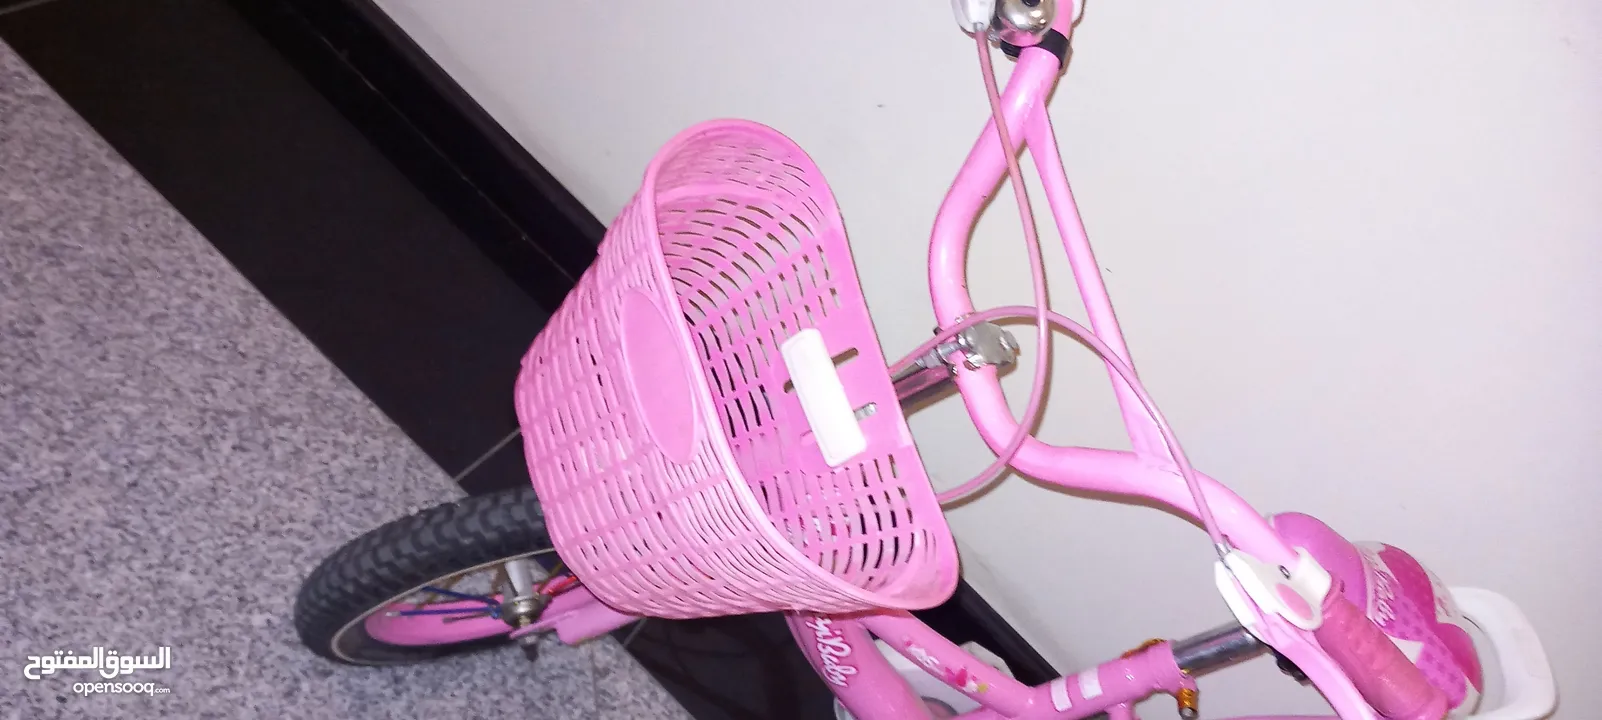 pink cycle  for gurl